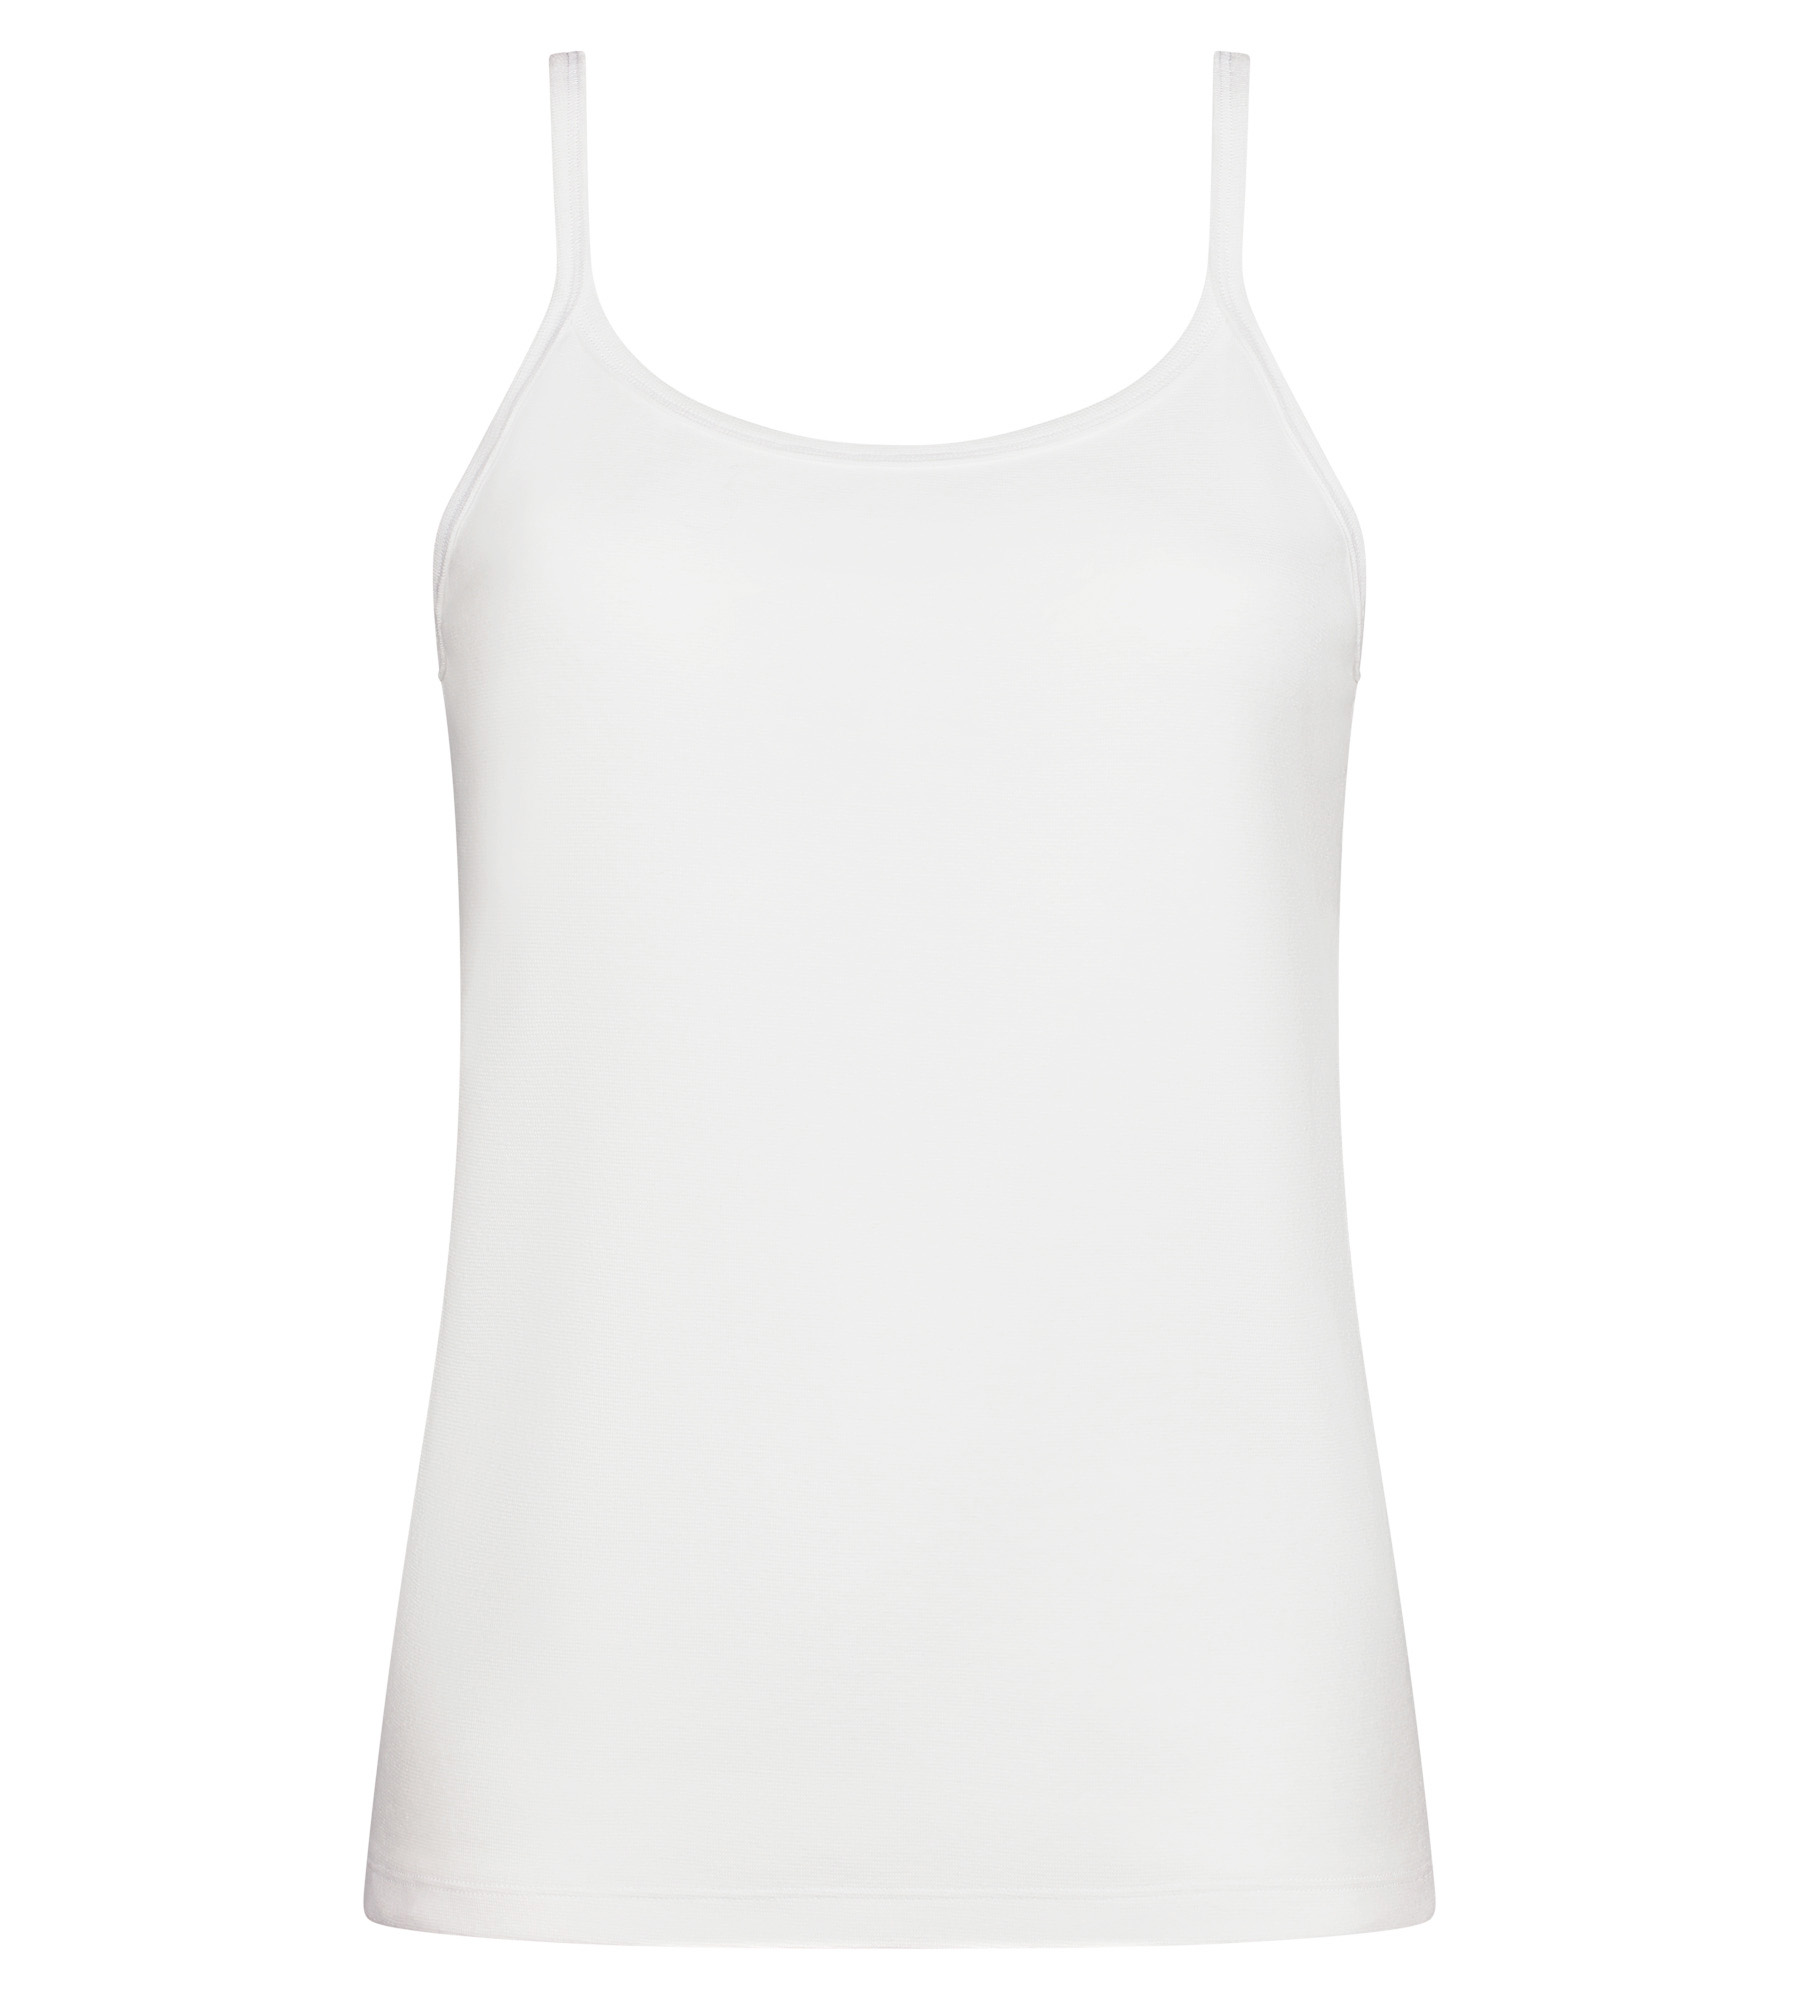 Camisole in white Cotton Liberty, , PLAYTEX